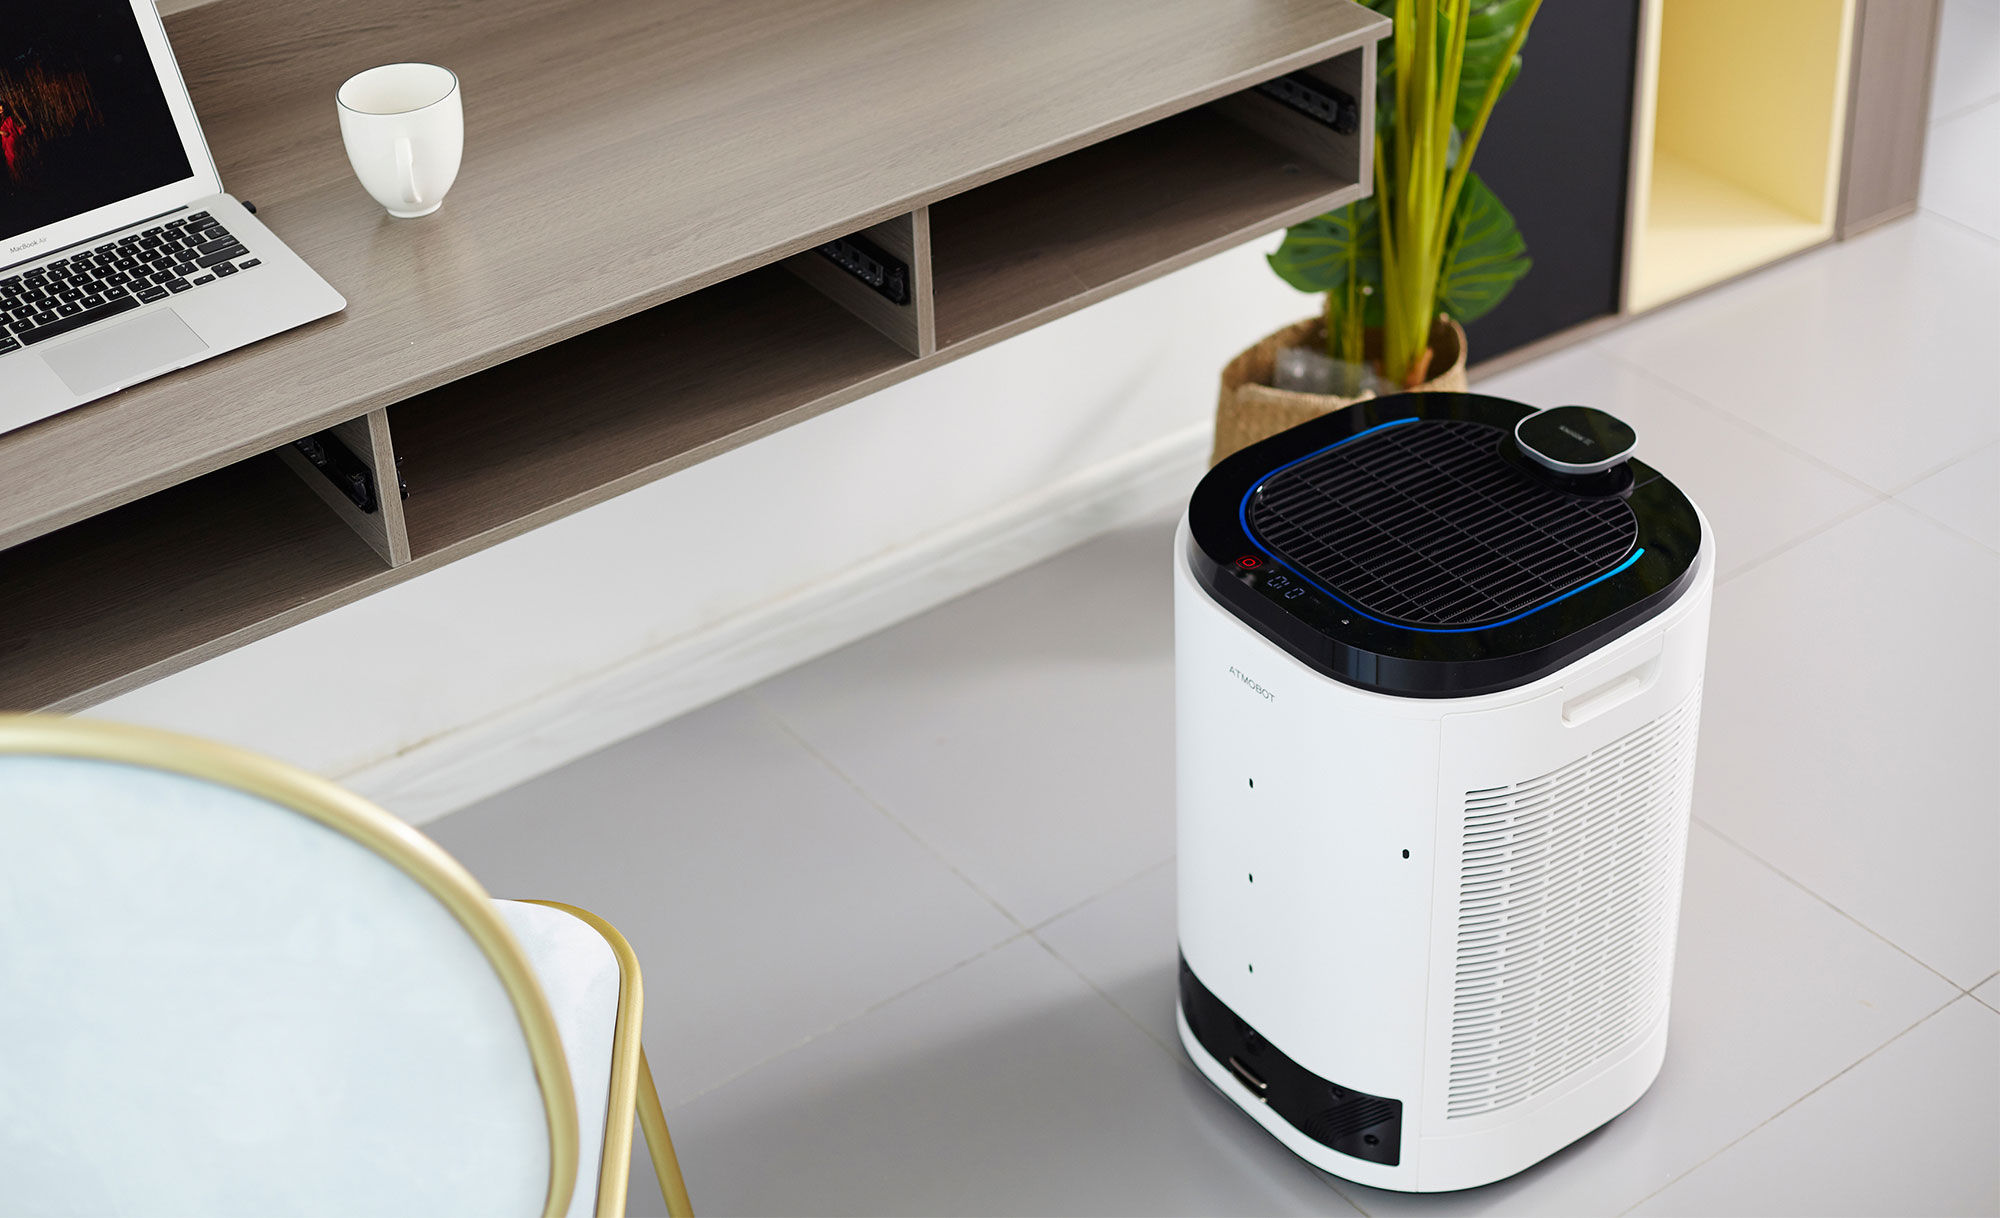 Ecovacs Atmobot launched at CES 2019